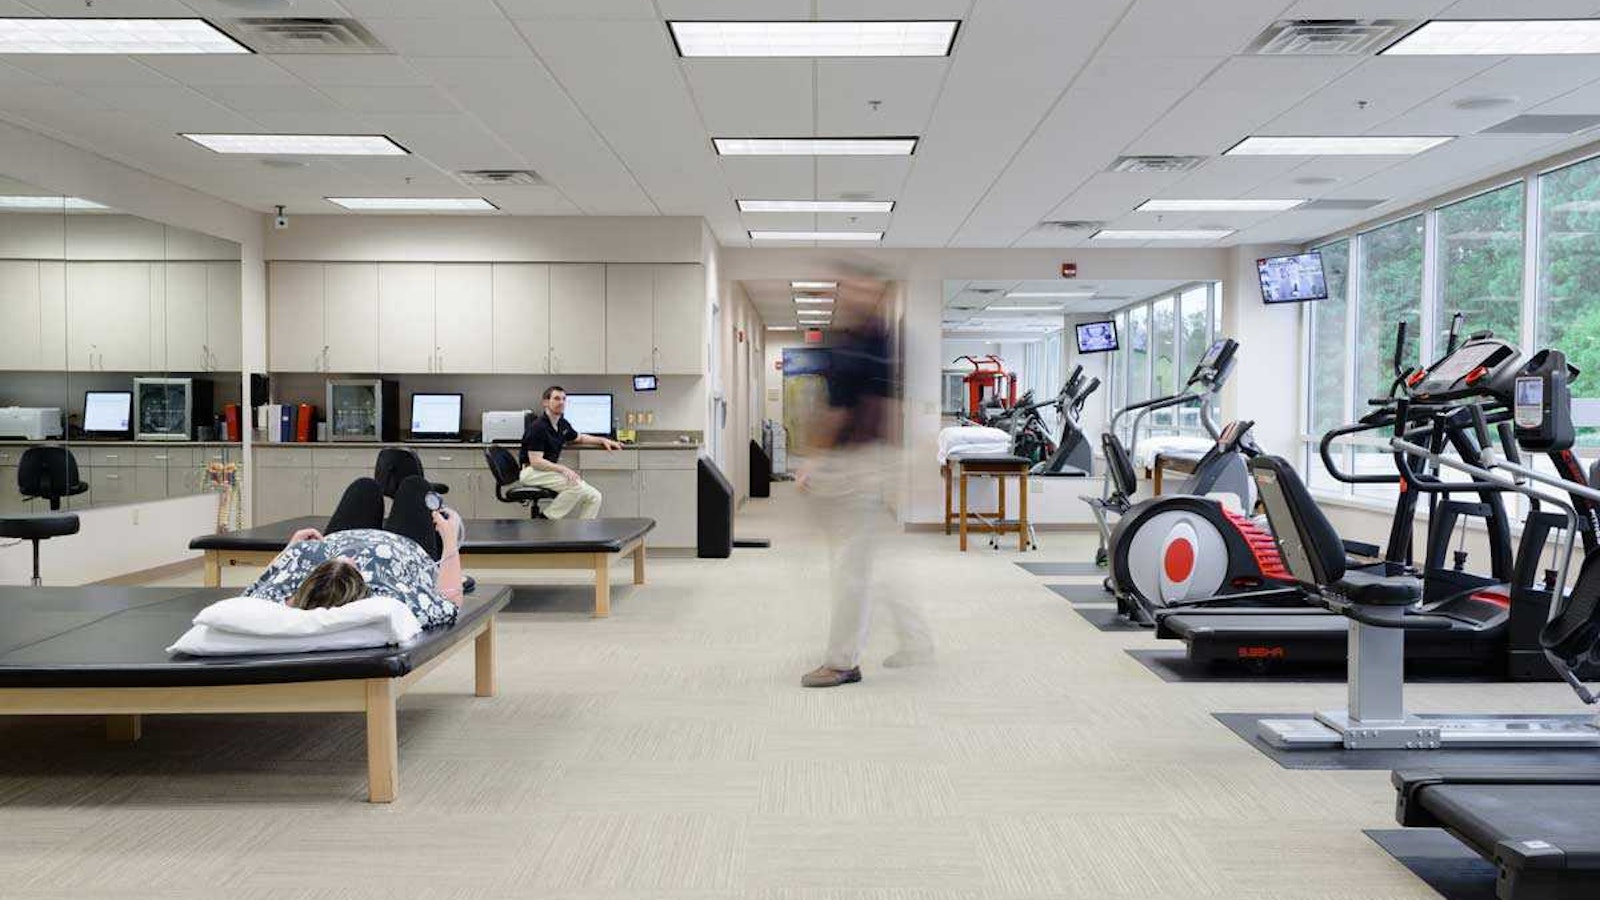 Blurred man walking through a physical therapy room